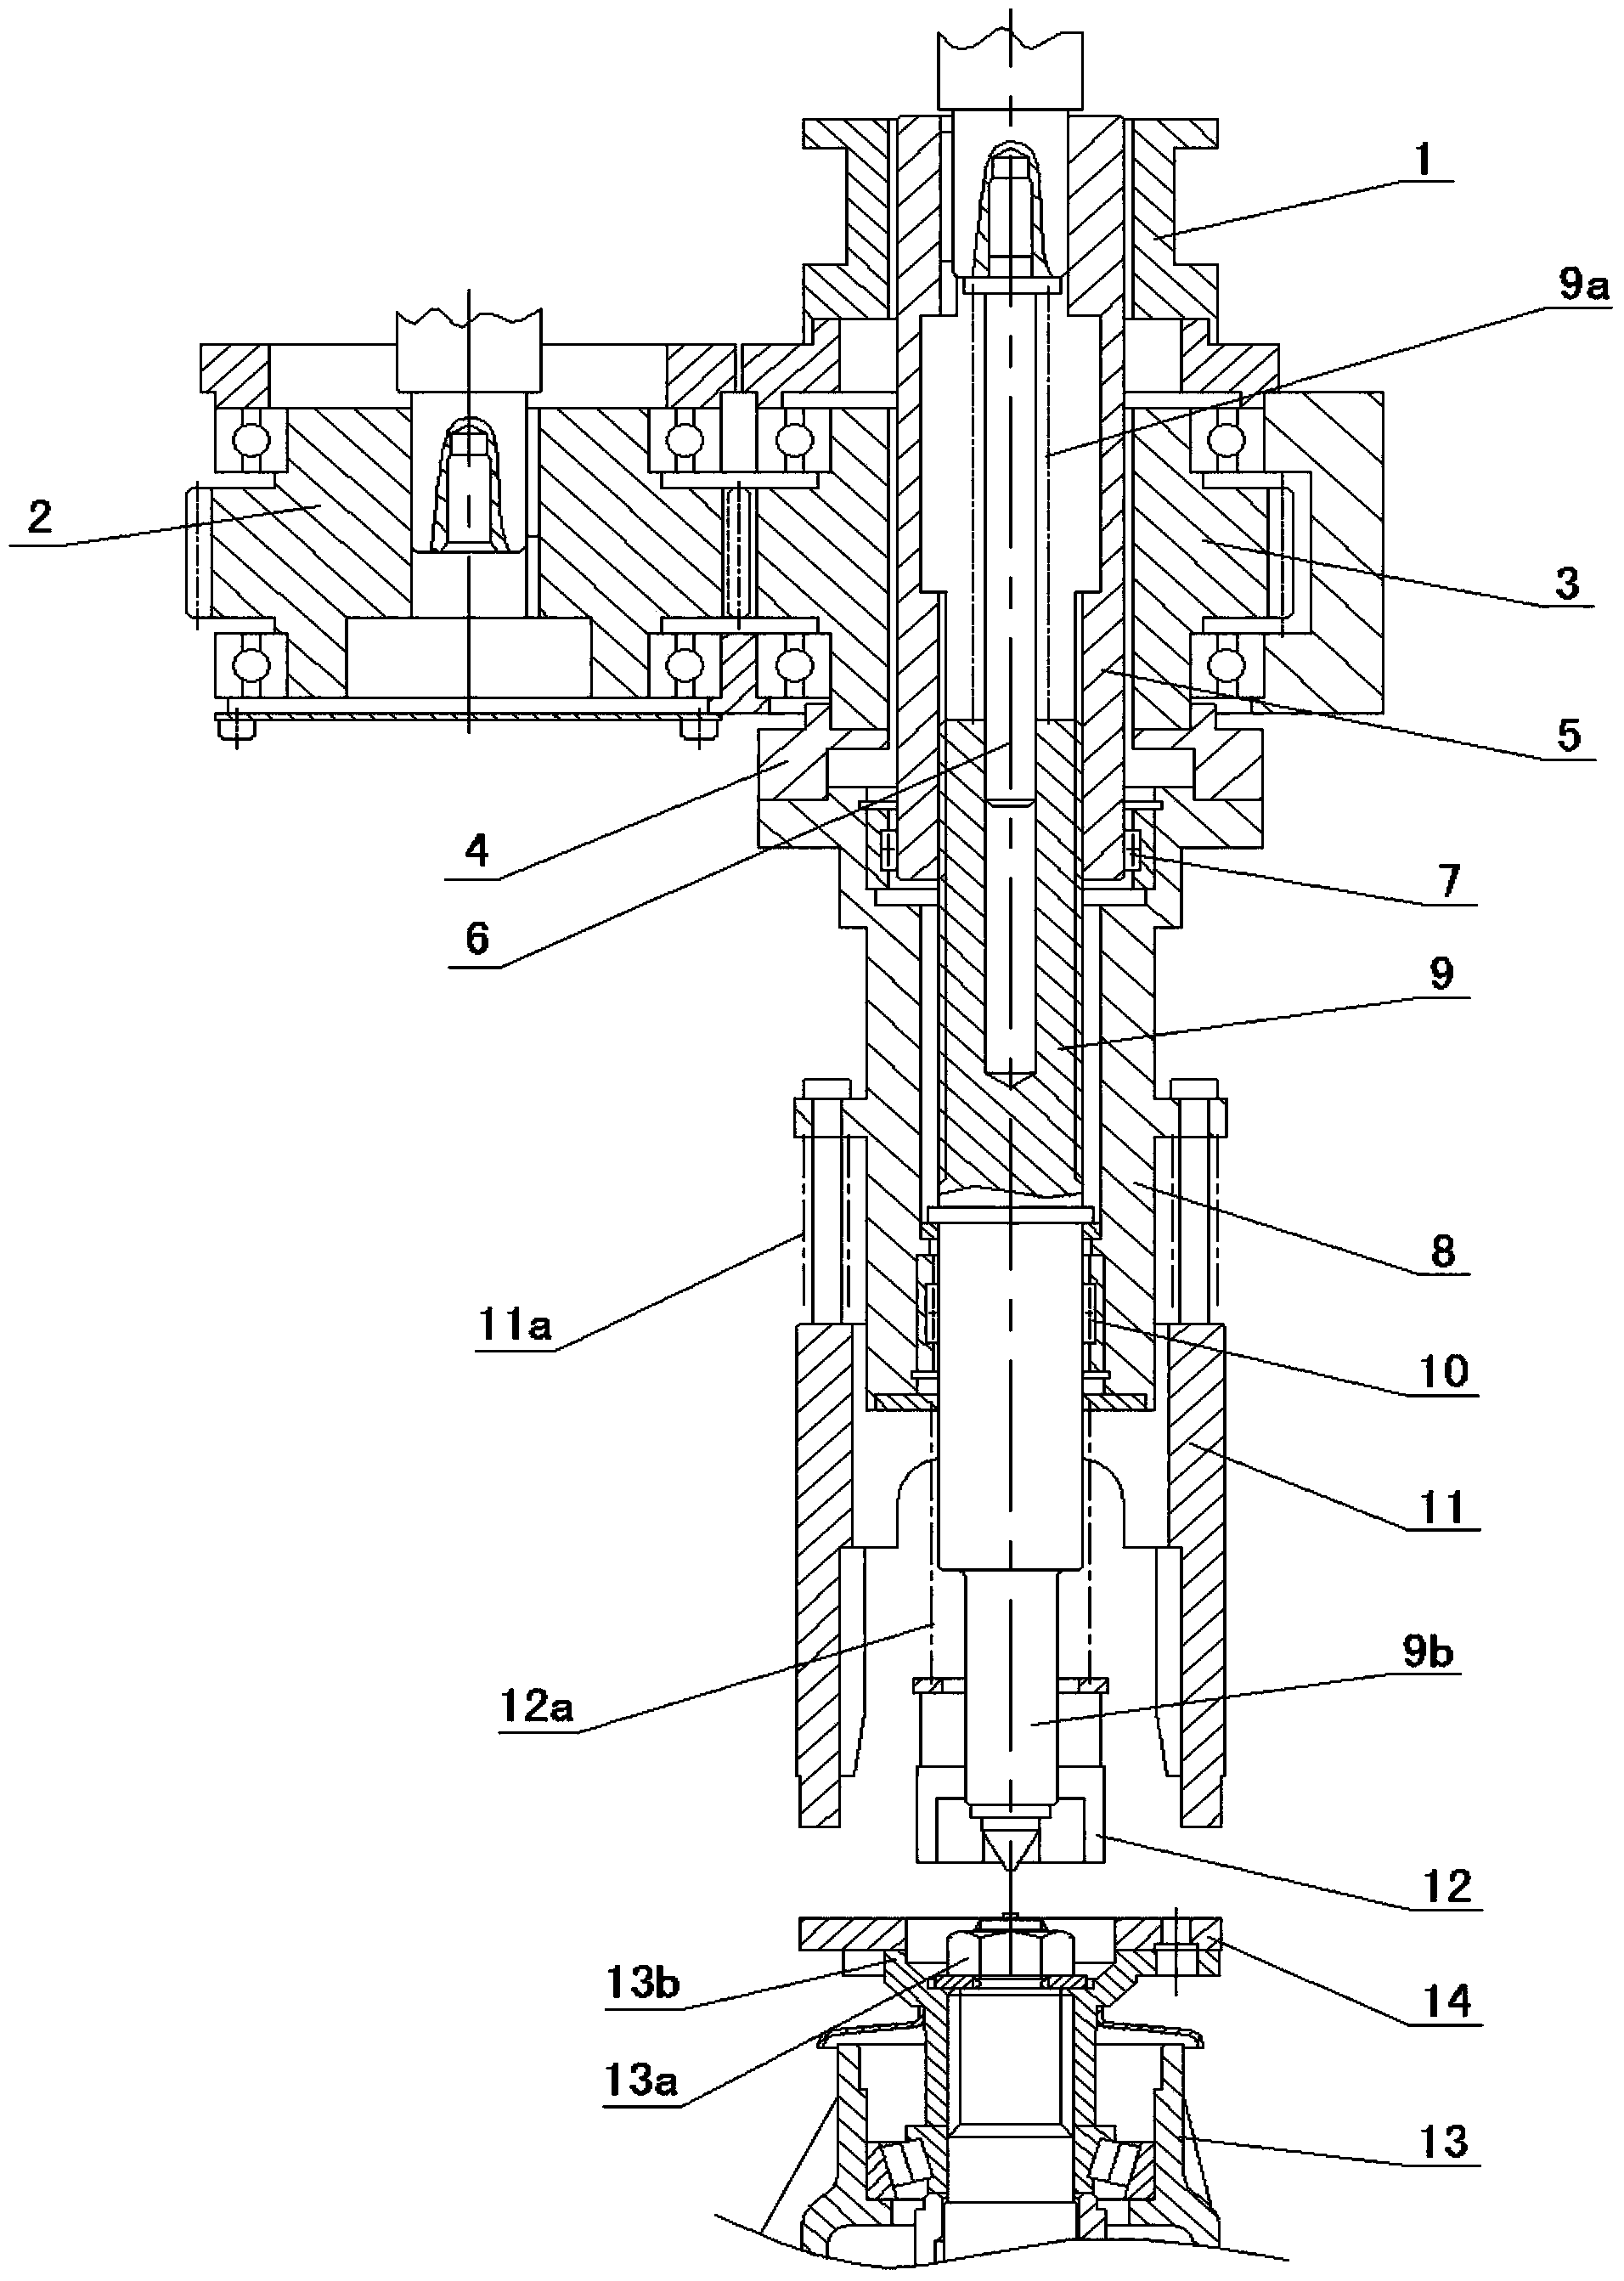 Main core nut differential screwing mechanism of drive axle assembly